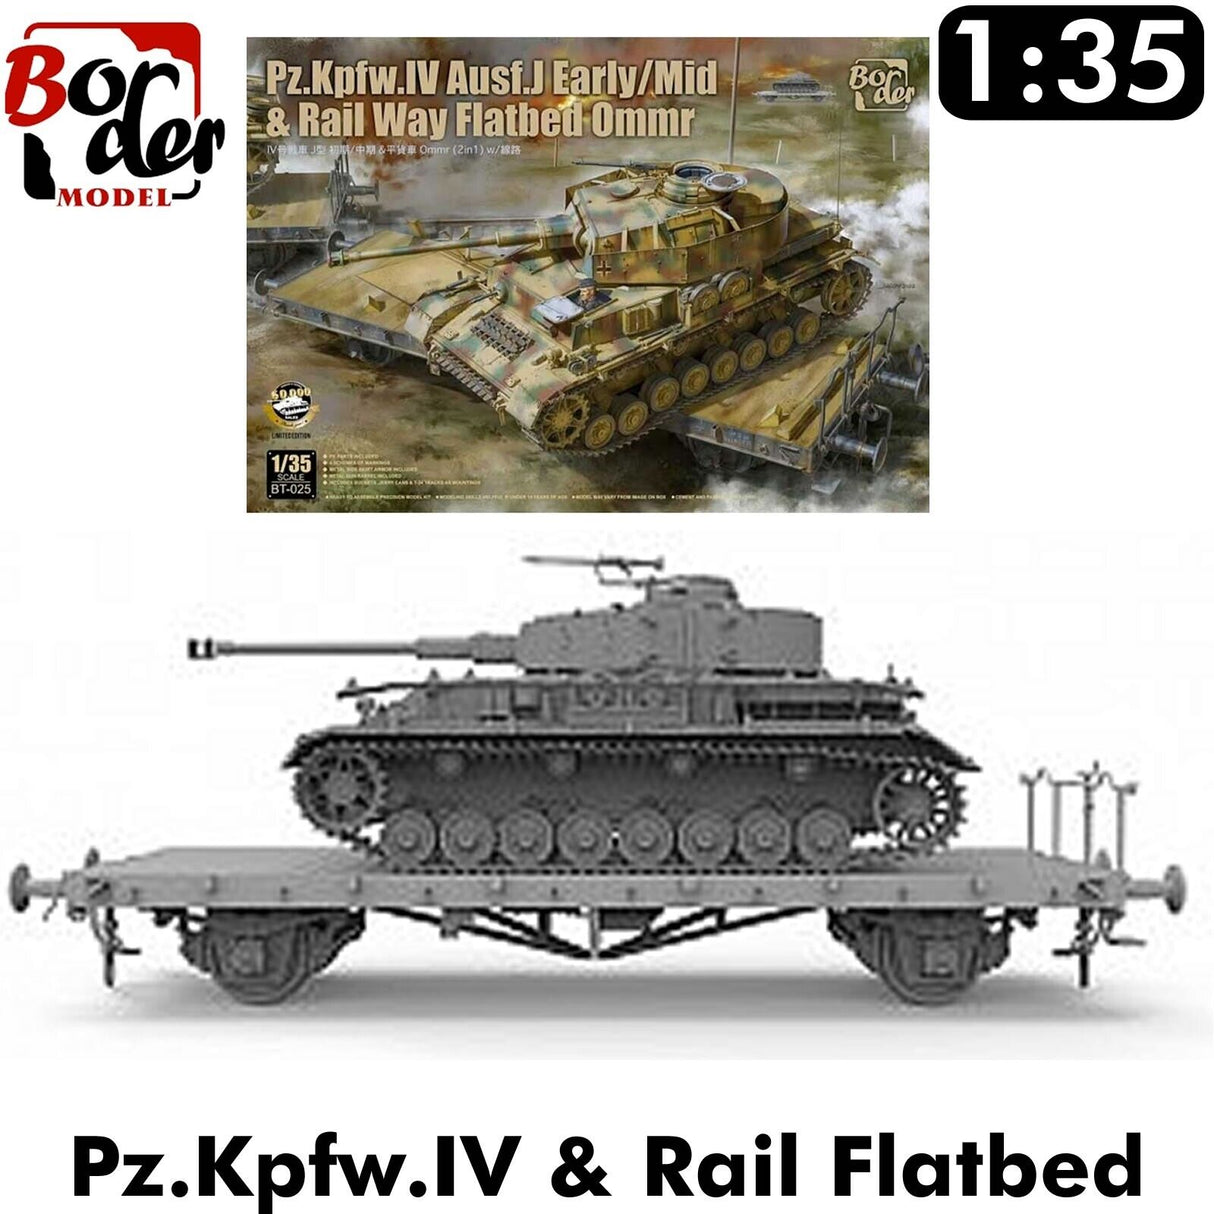 Border Model 1/35 Panzer 4 Ausf J Early/Mid and Railway Flatbed